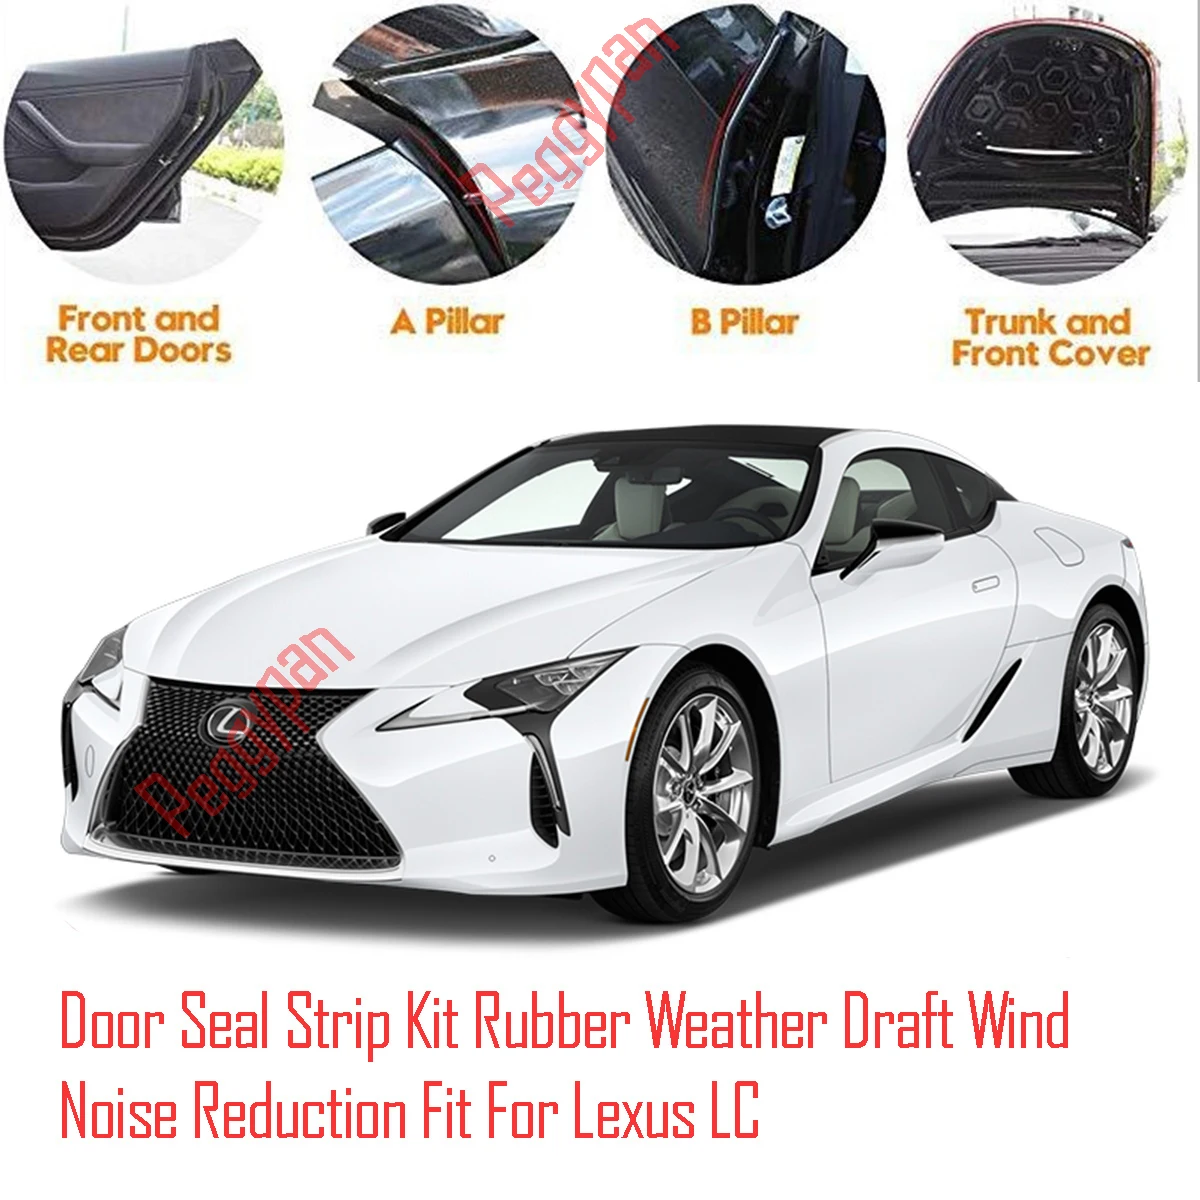 Door Seal Strip Kit Self Adhesive Window Engine Cover Soundproof Rubber Weather Draft Wind Noise Reduction Fit For Lexus LC